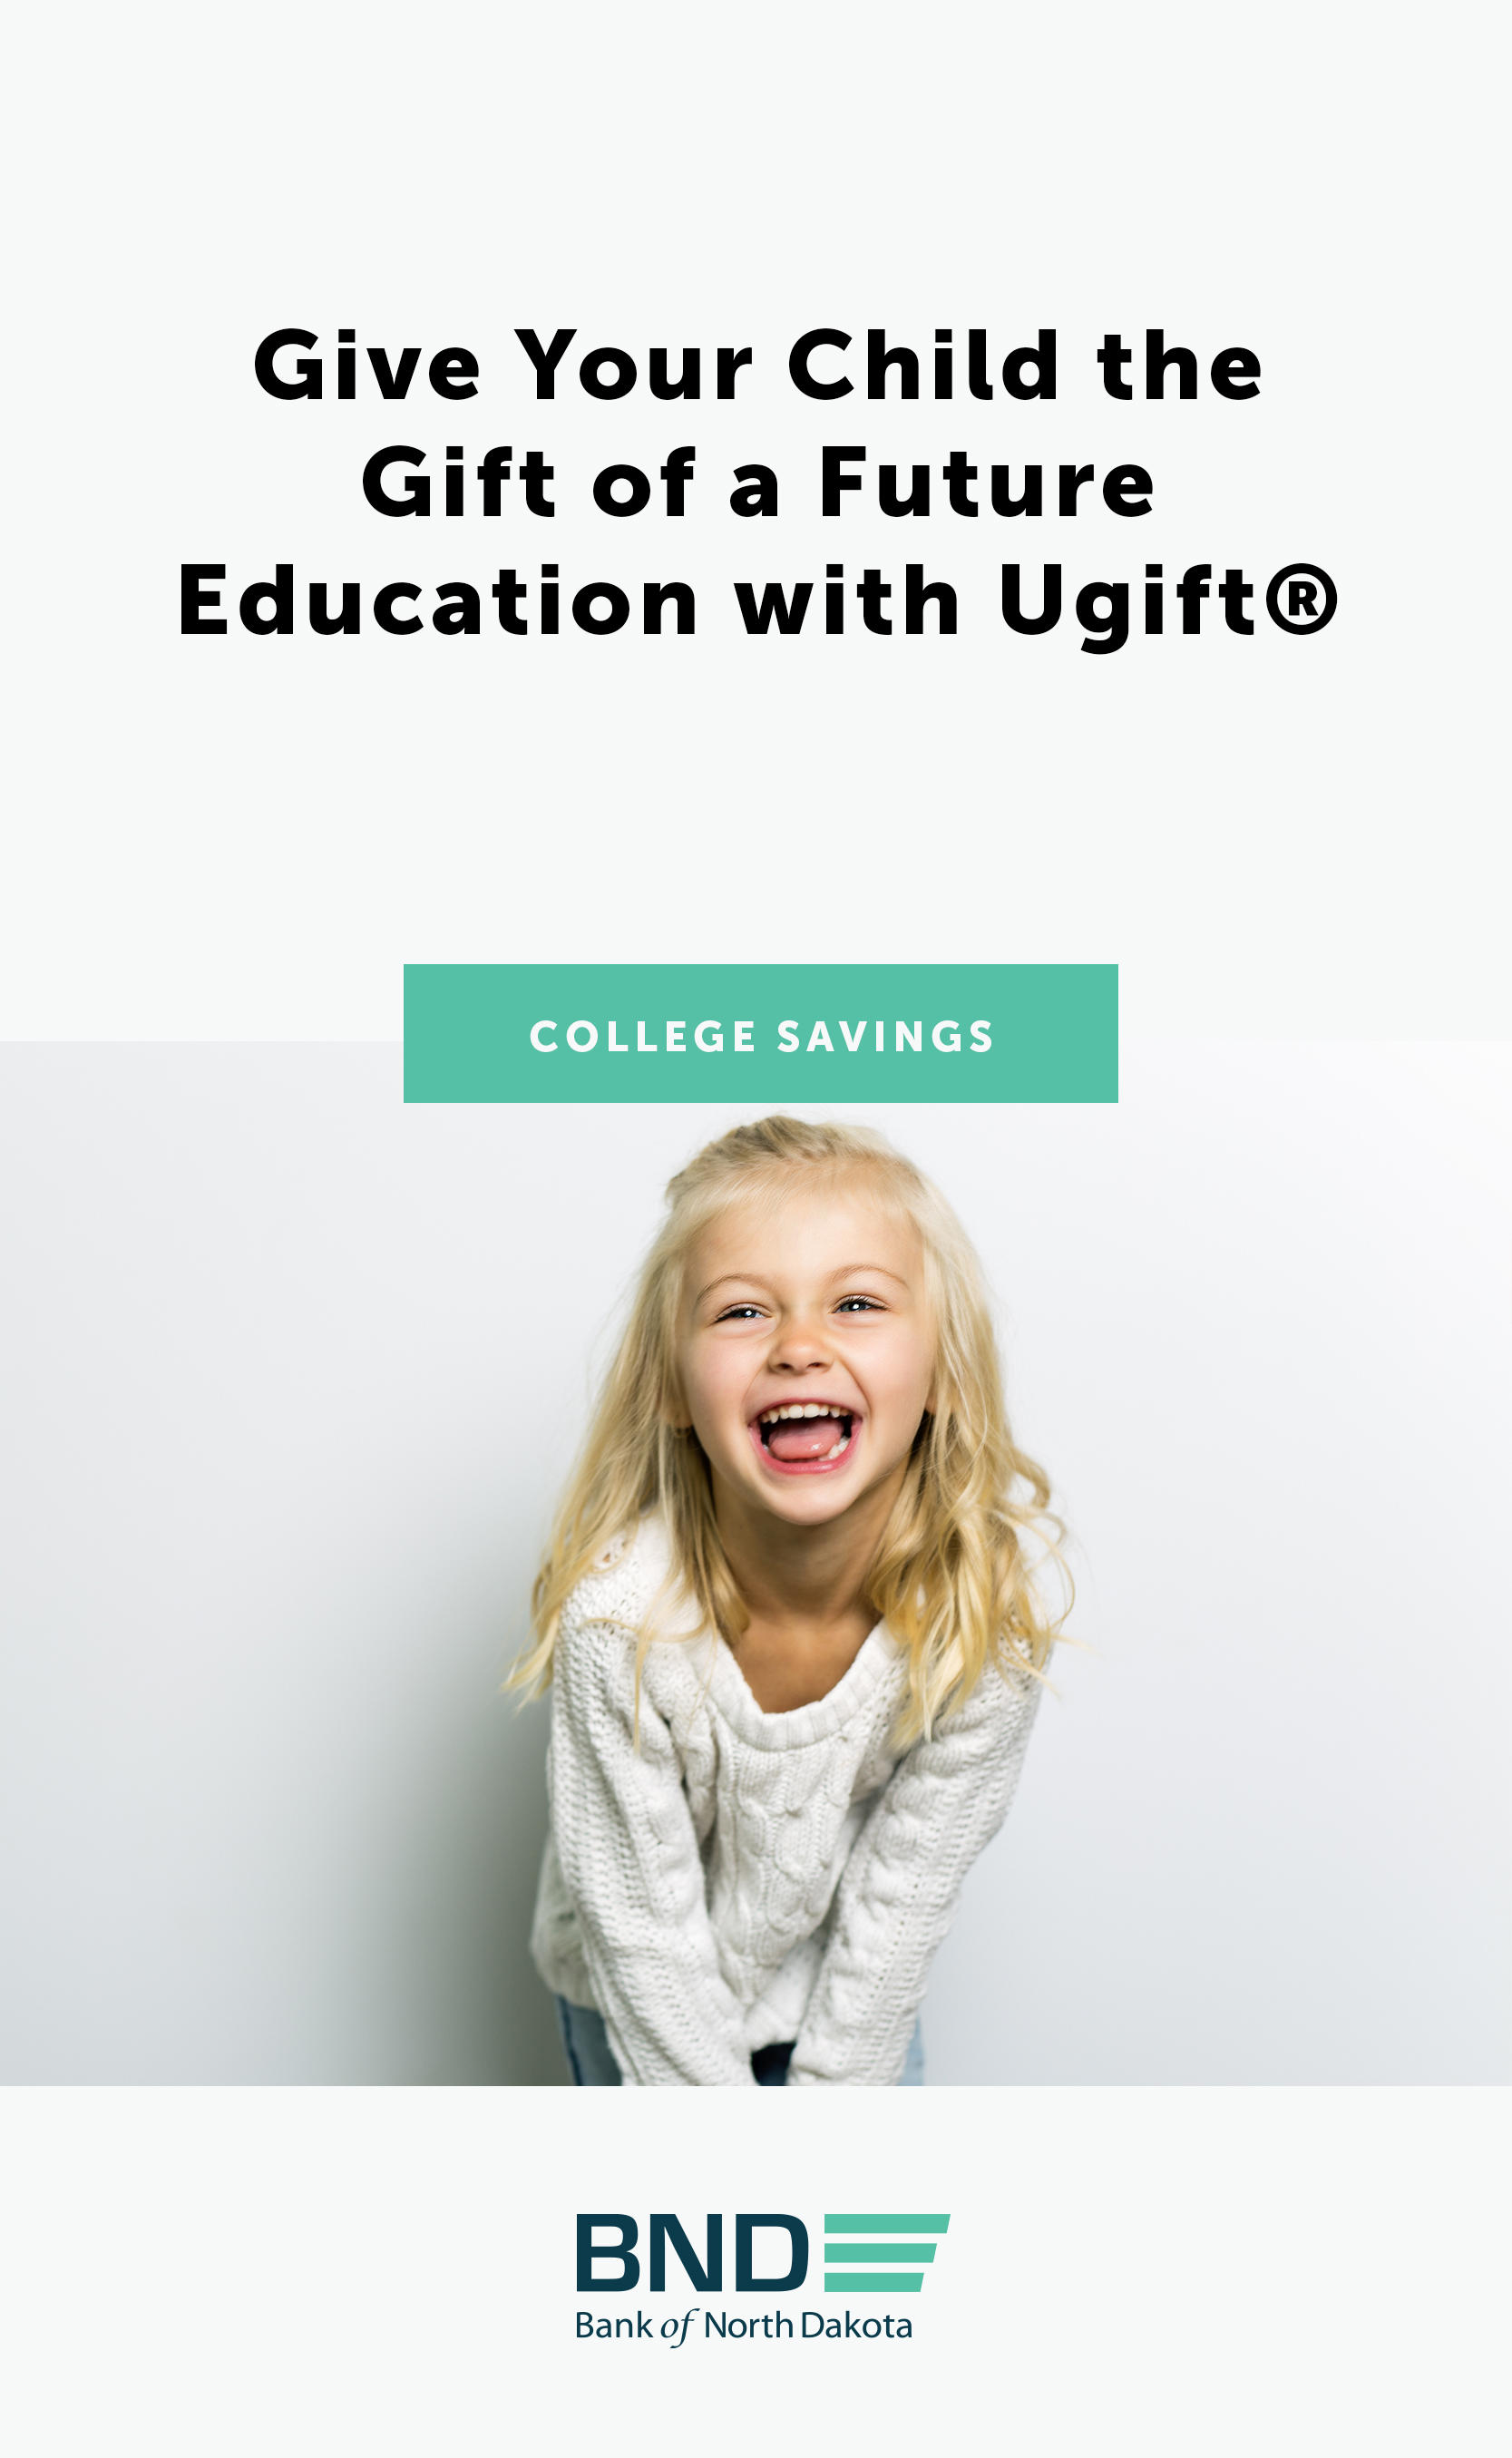 Give-Your-Child-UGift